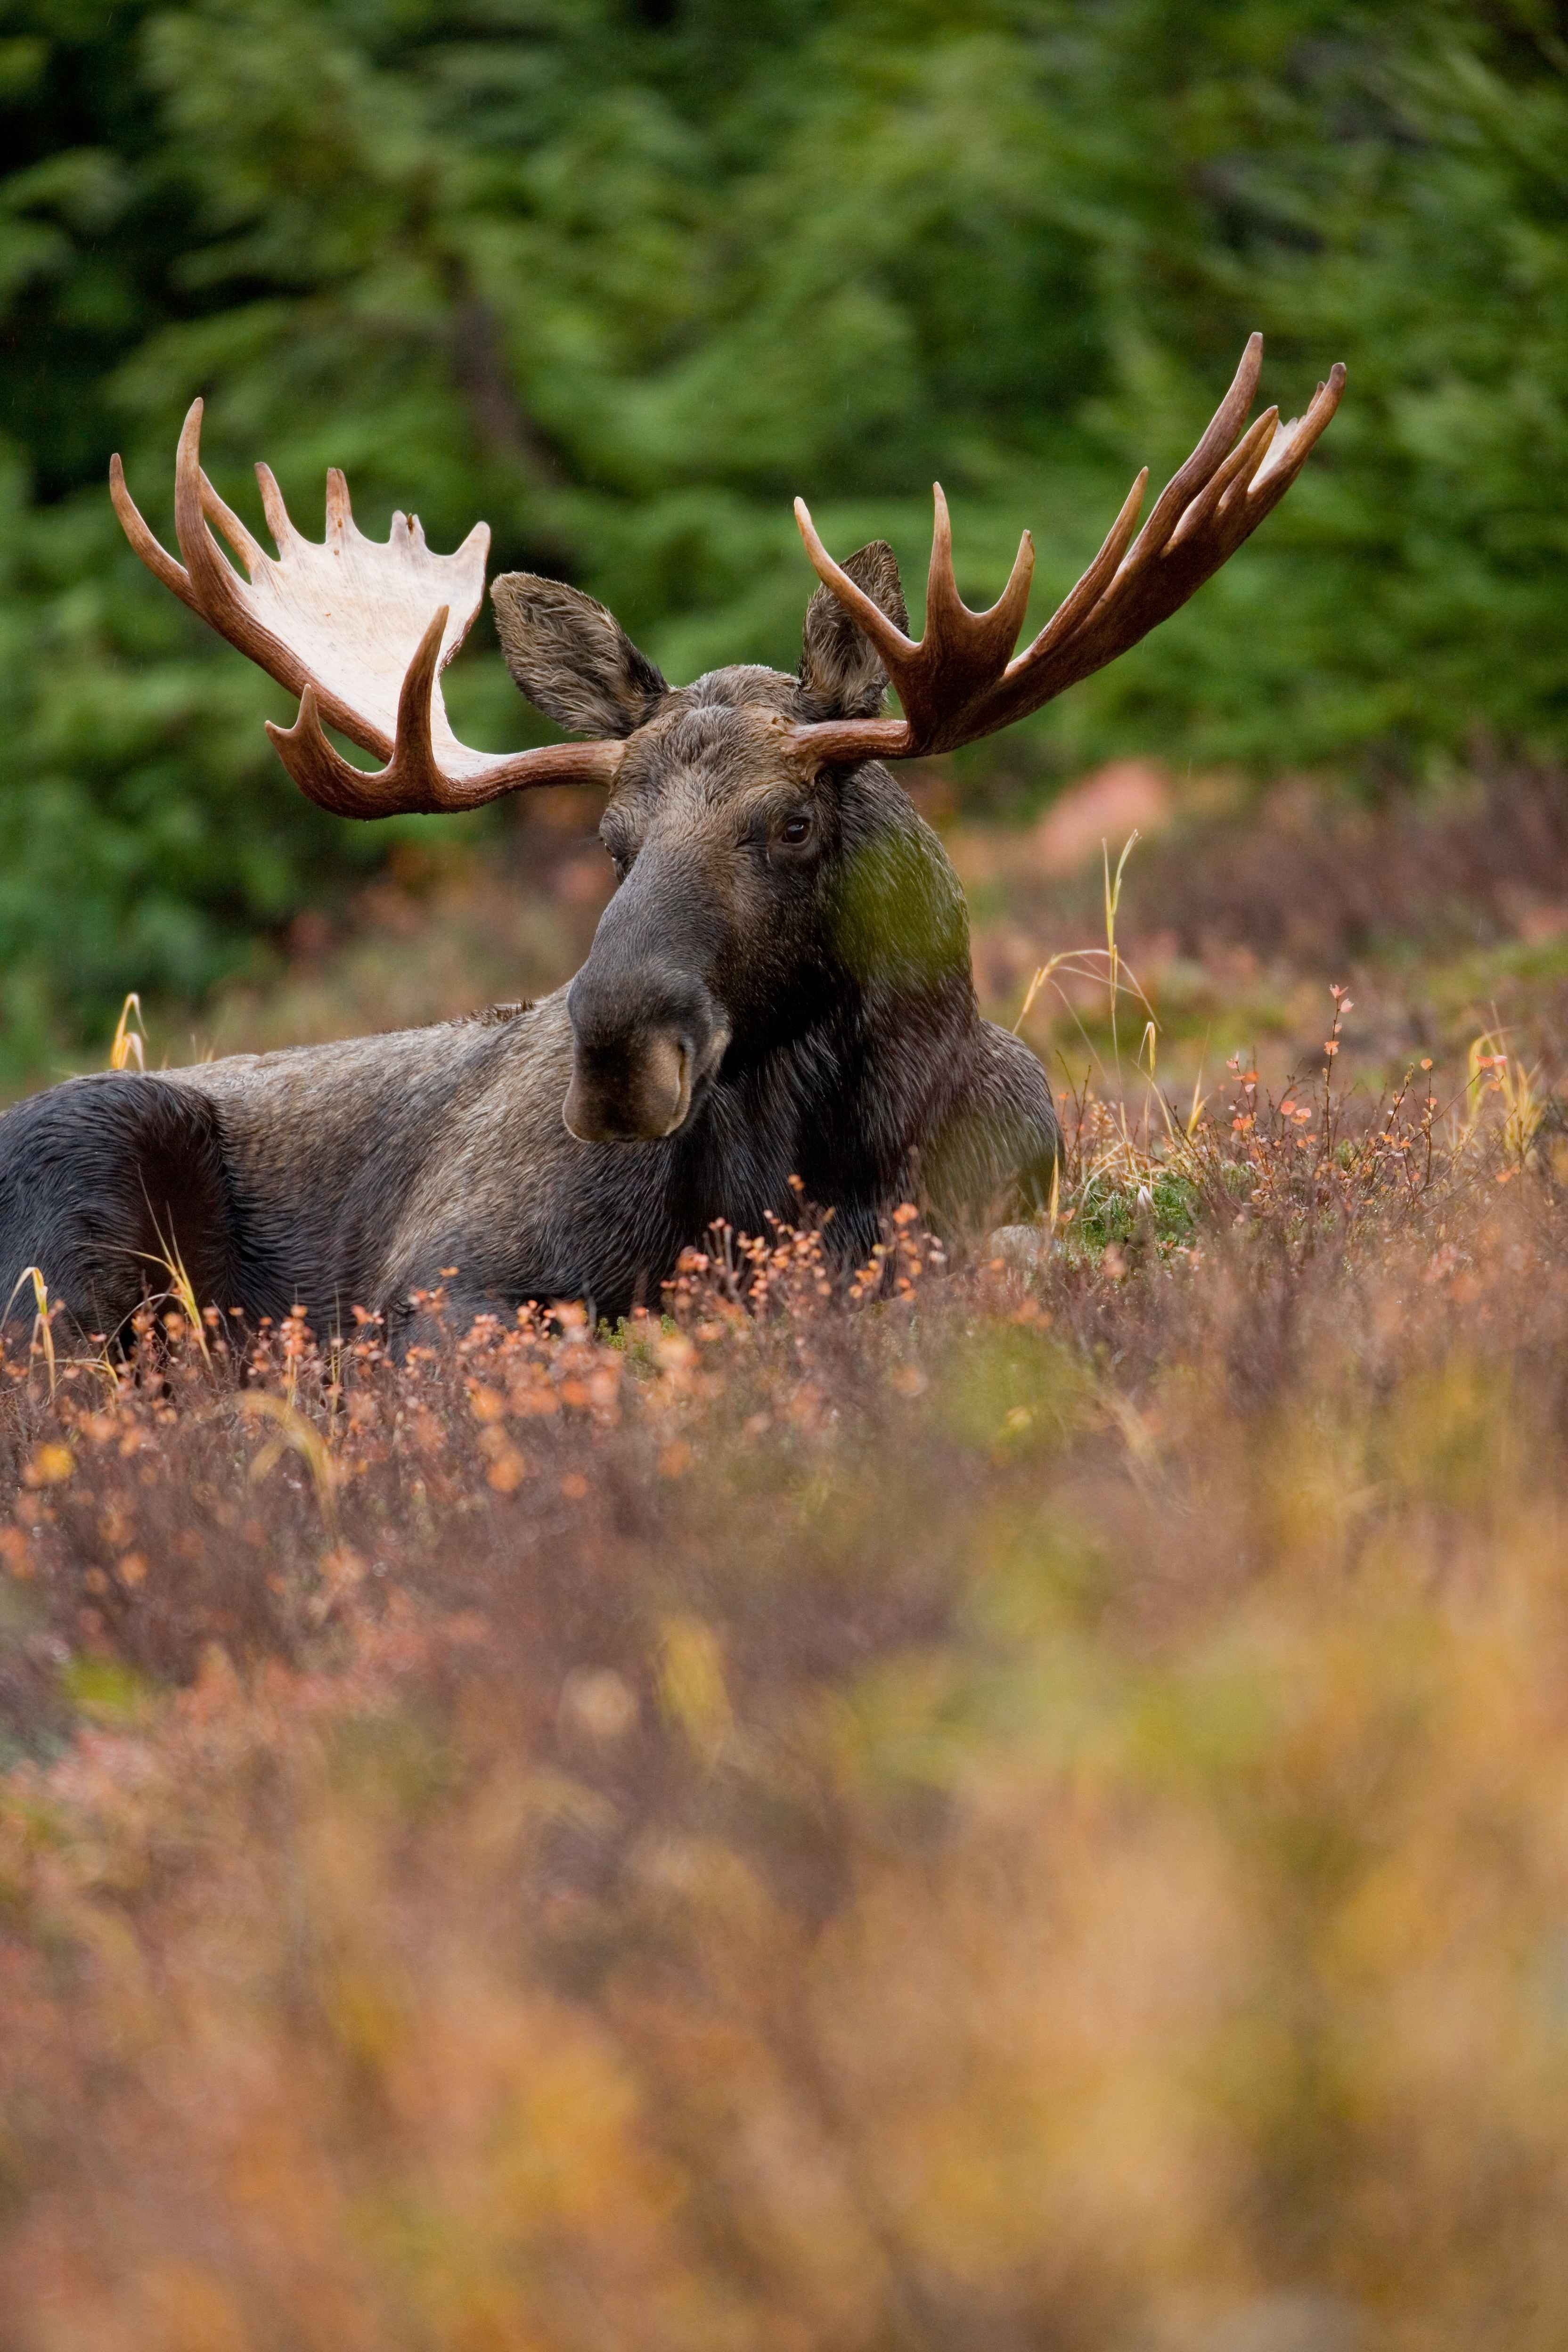 Field, Frontal, Animal, Resting, Male, animals in the wild, antler